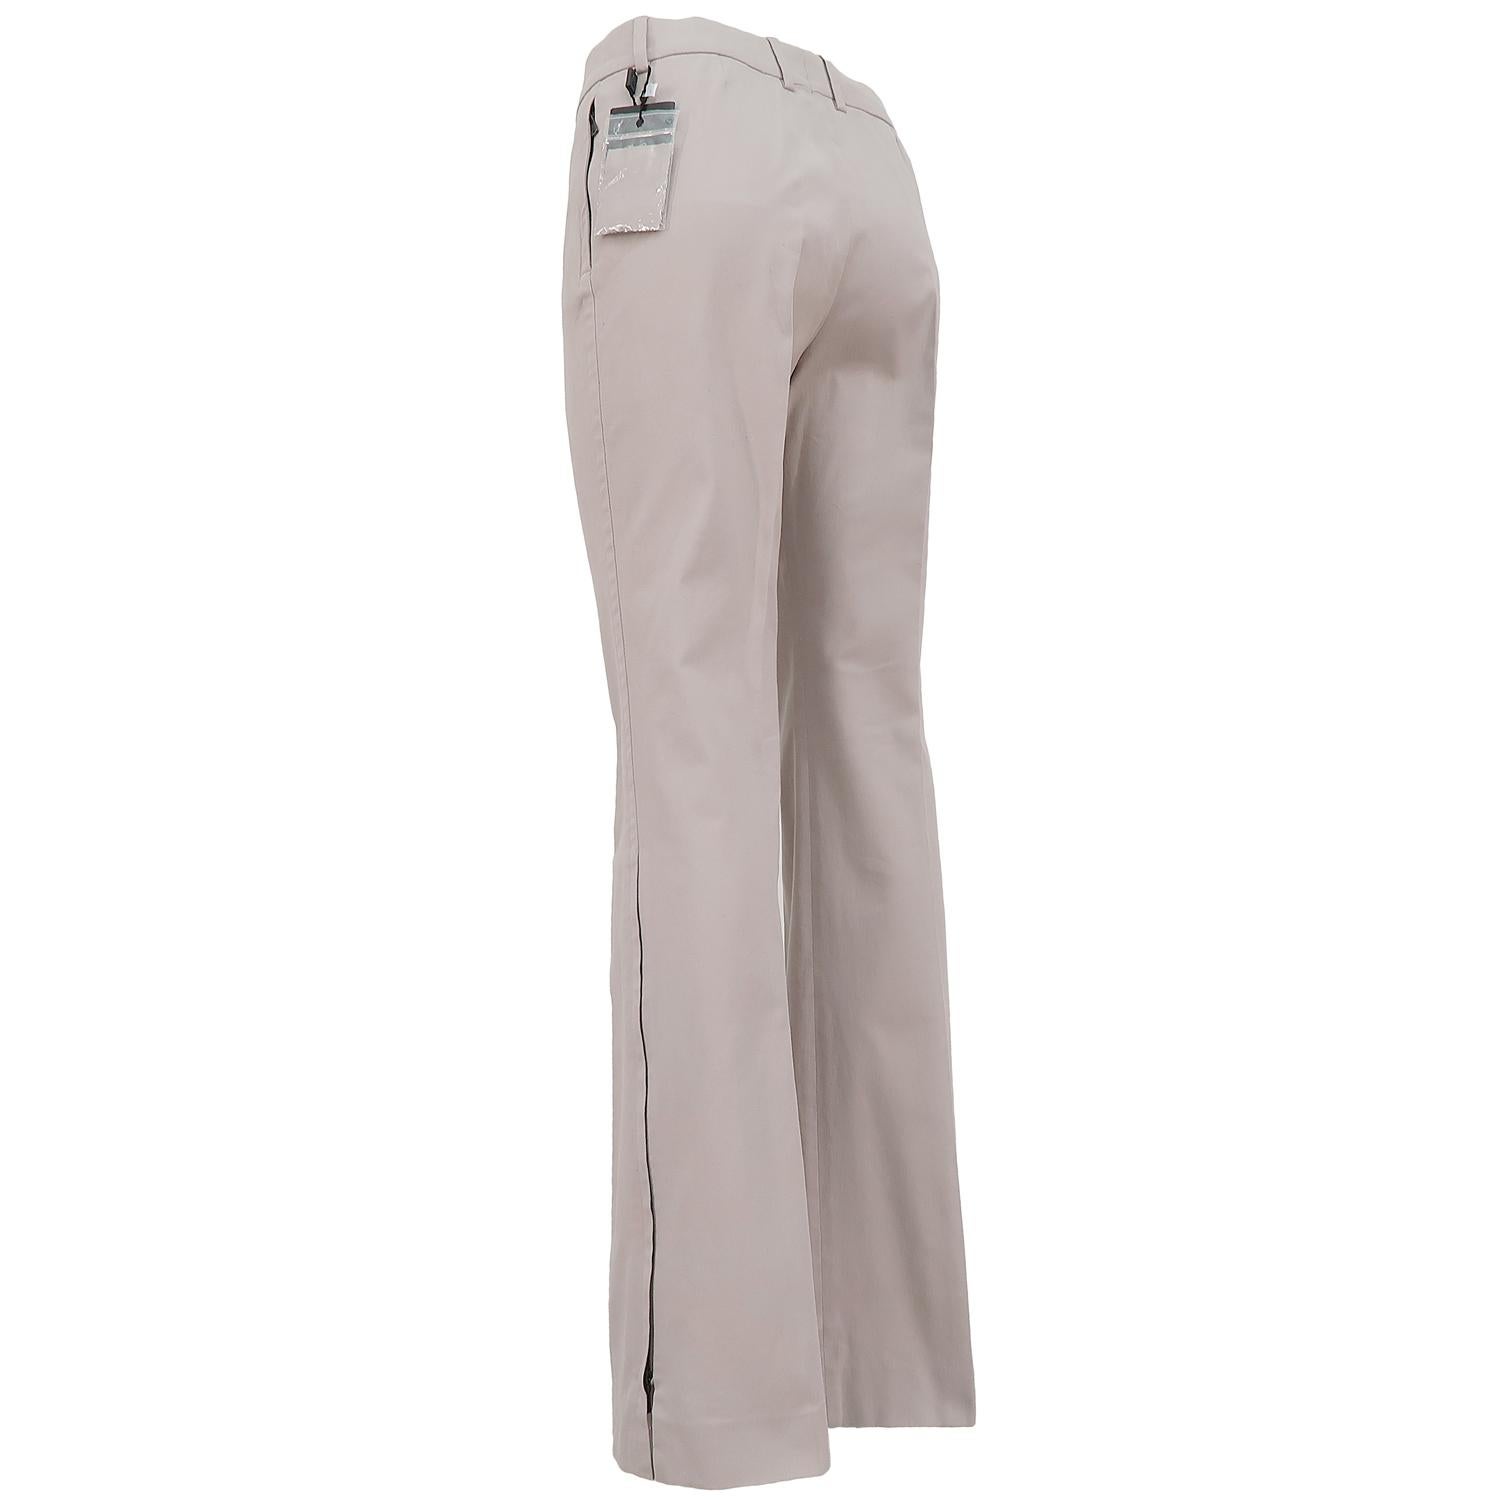 Yves Saint Laurent by Tom Ford FW-2003 Higher Waist Cotton Pants In Good Condition For Sale In Brussels, BE